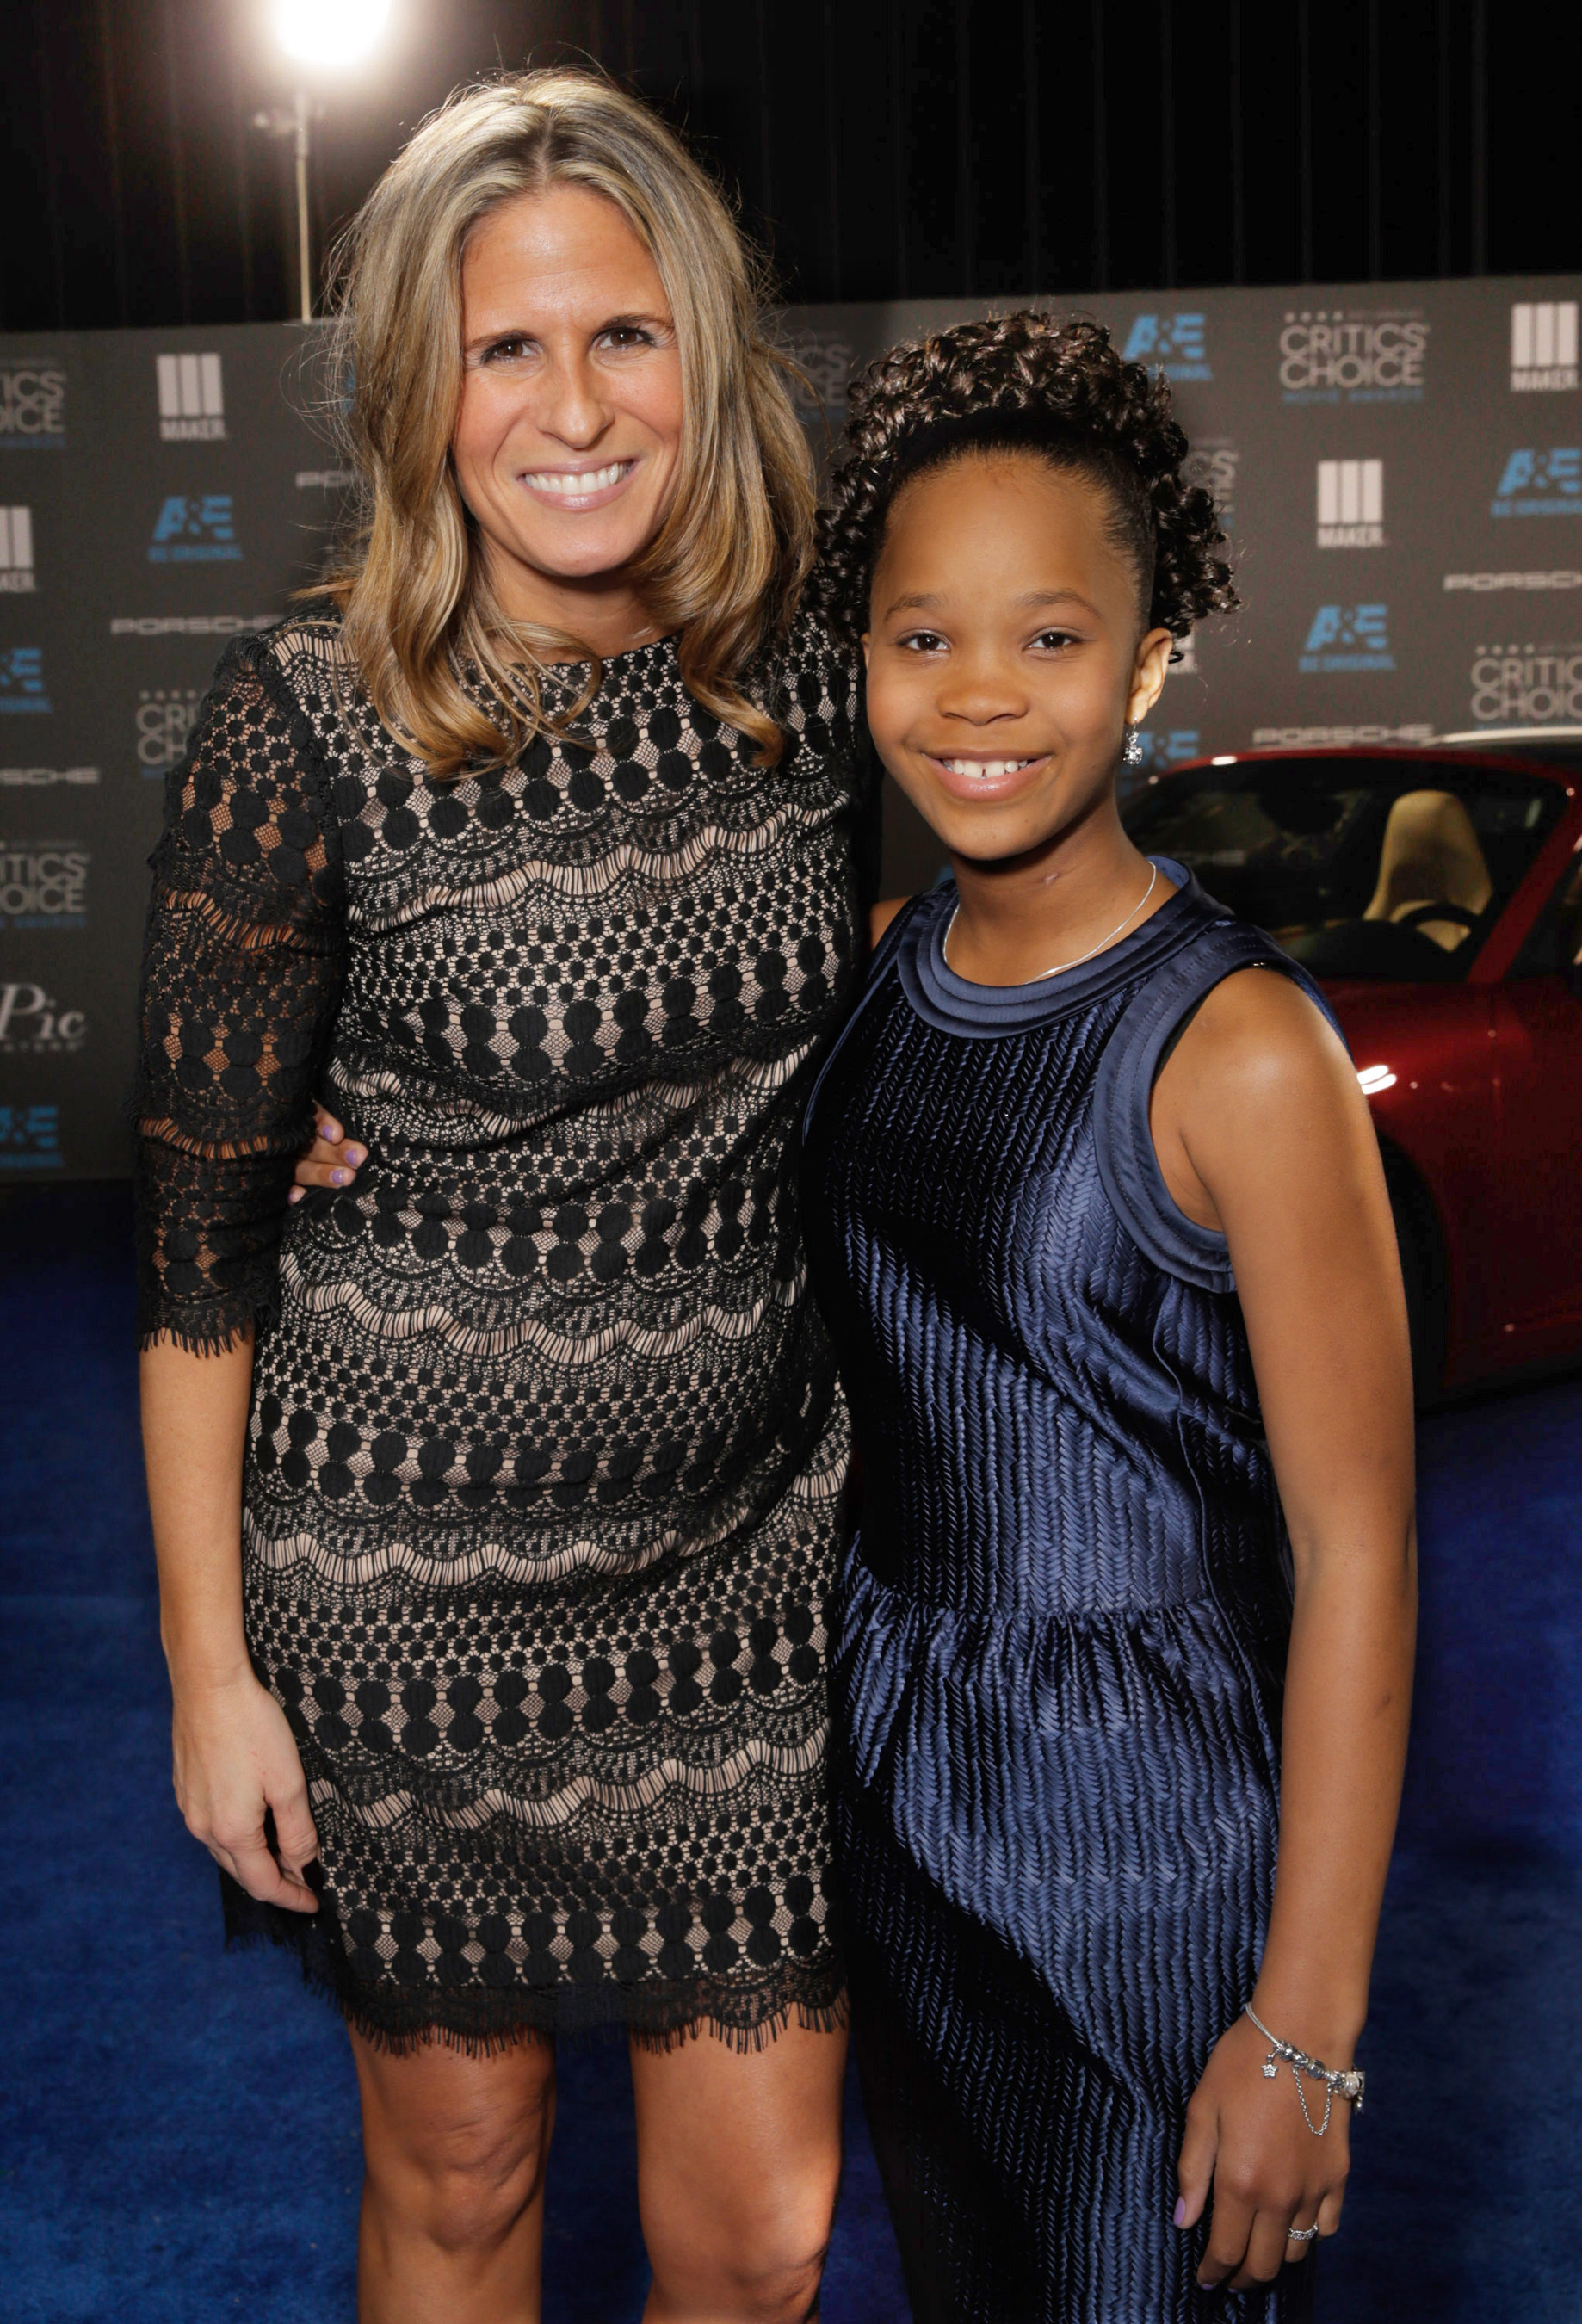 Cristina Cheever, left, and Quvenzhane Wallis arrive as Porsche celebrates the 20th Annual Critics' Choice Movie Awards at the Hollywood Palladium on Thursday, Jan.15, 2015, in Hollywood, Calif. (Photo by Todd Williamson/Invision for Porsche/AP Images)